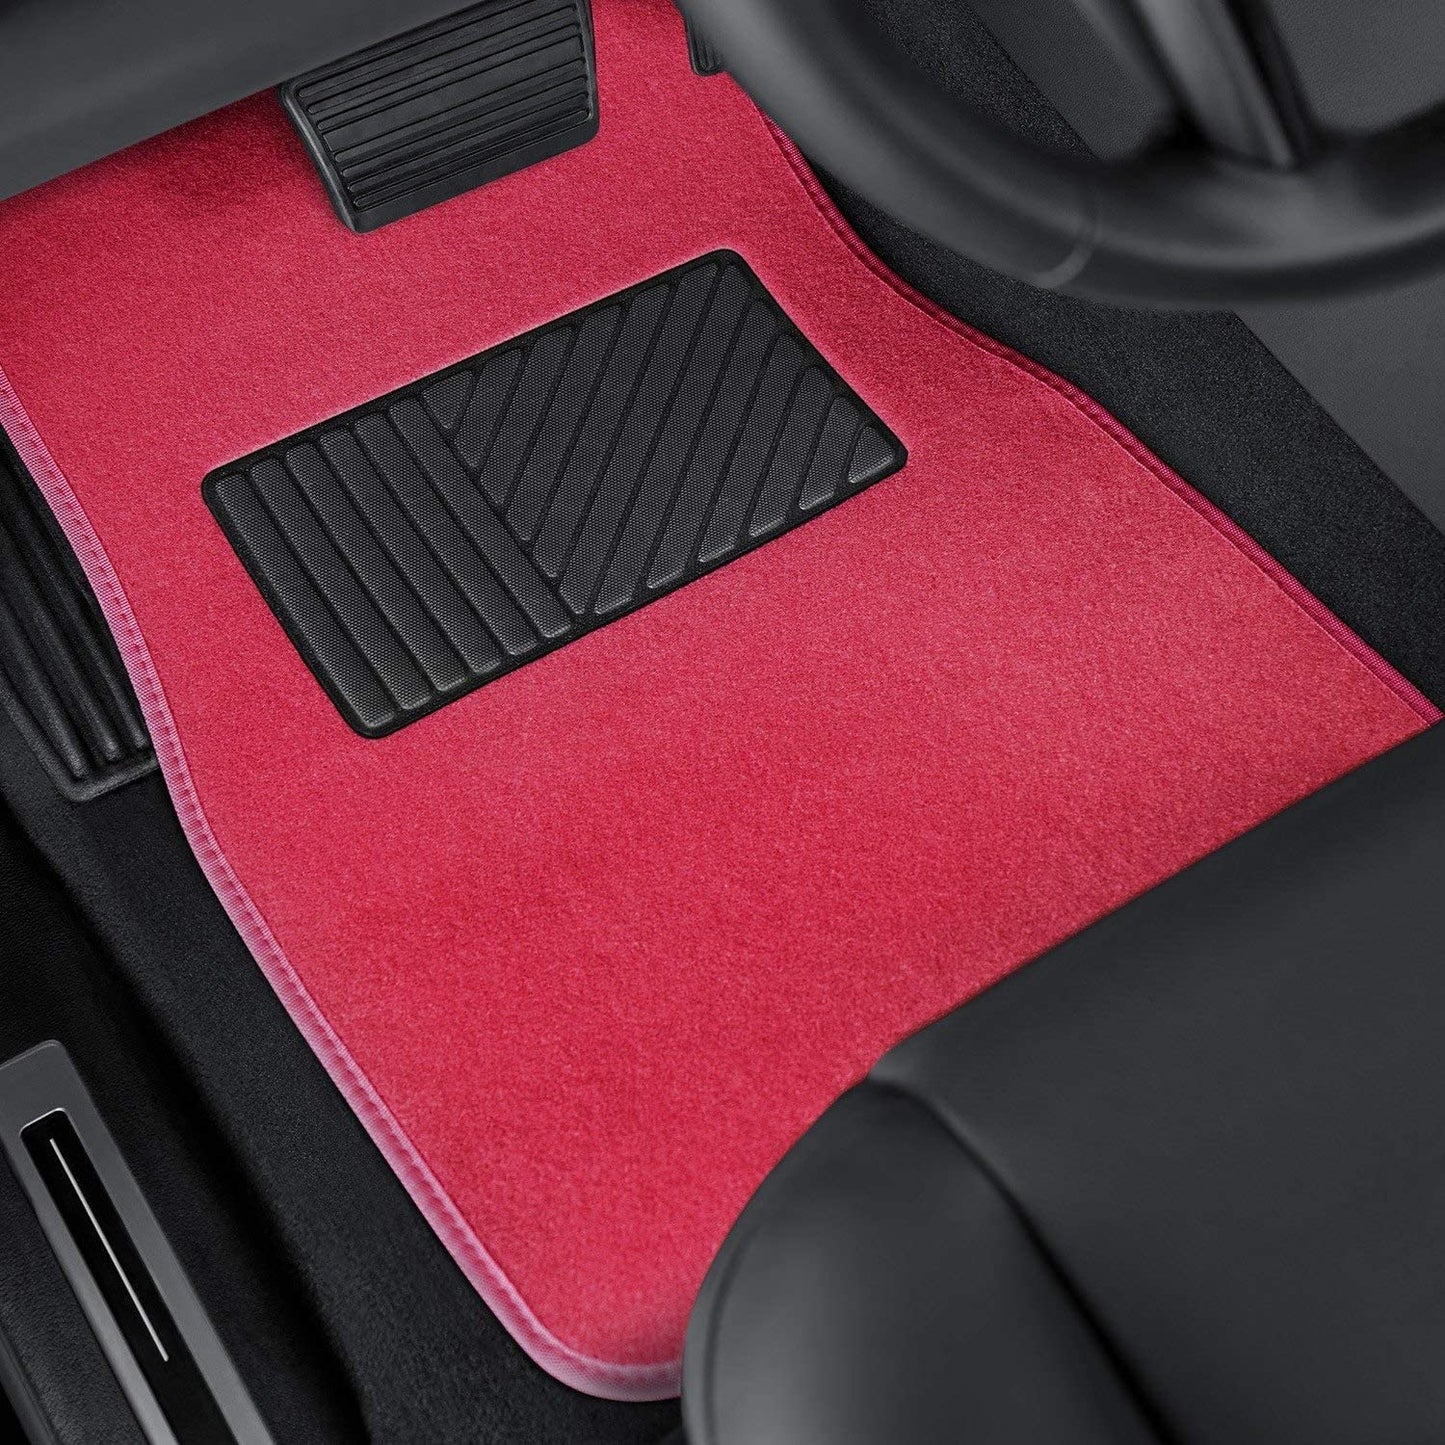 4 Piece Luxe Carpet-Floor-Mats Set for Car - Rubber-Lined All-Weather Heavy-Duty Protection for All Vehicles, Charcoal